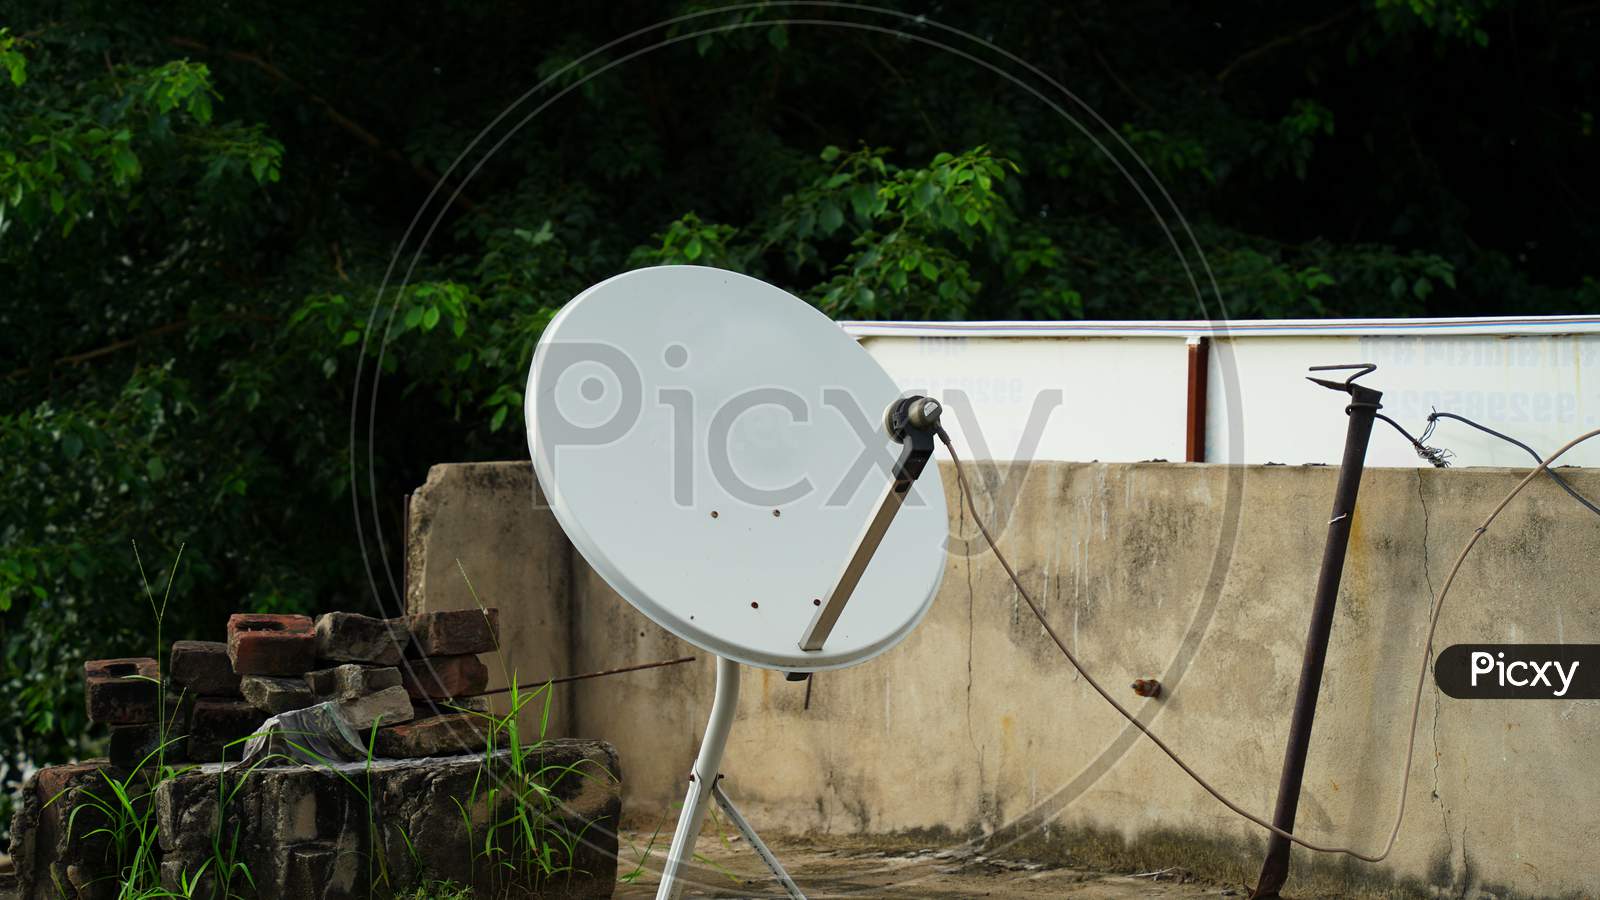 Small satellite dish for Television communication and digital service. Direct to home or DTH service satellite antenna.